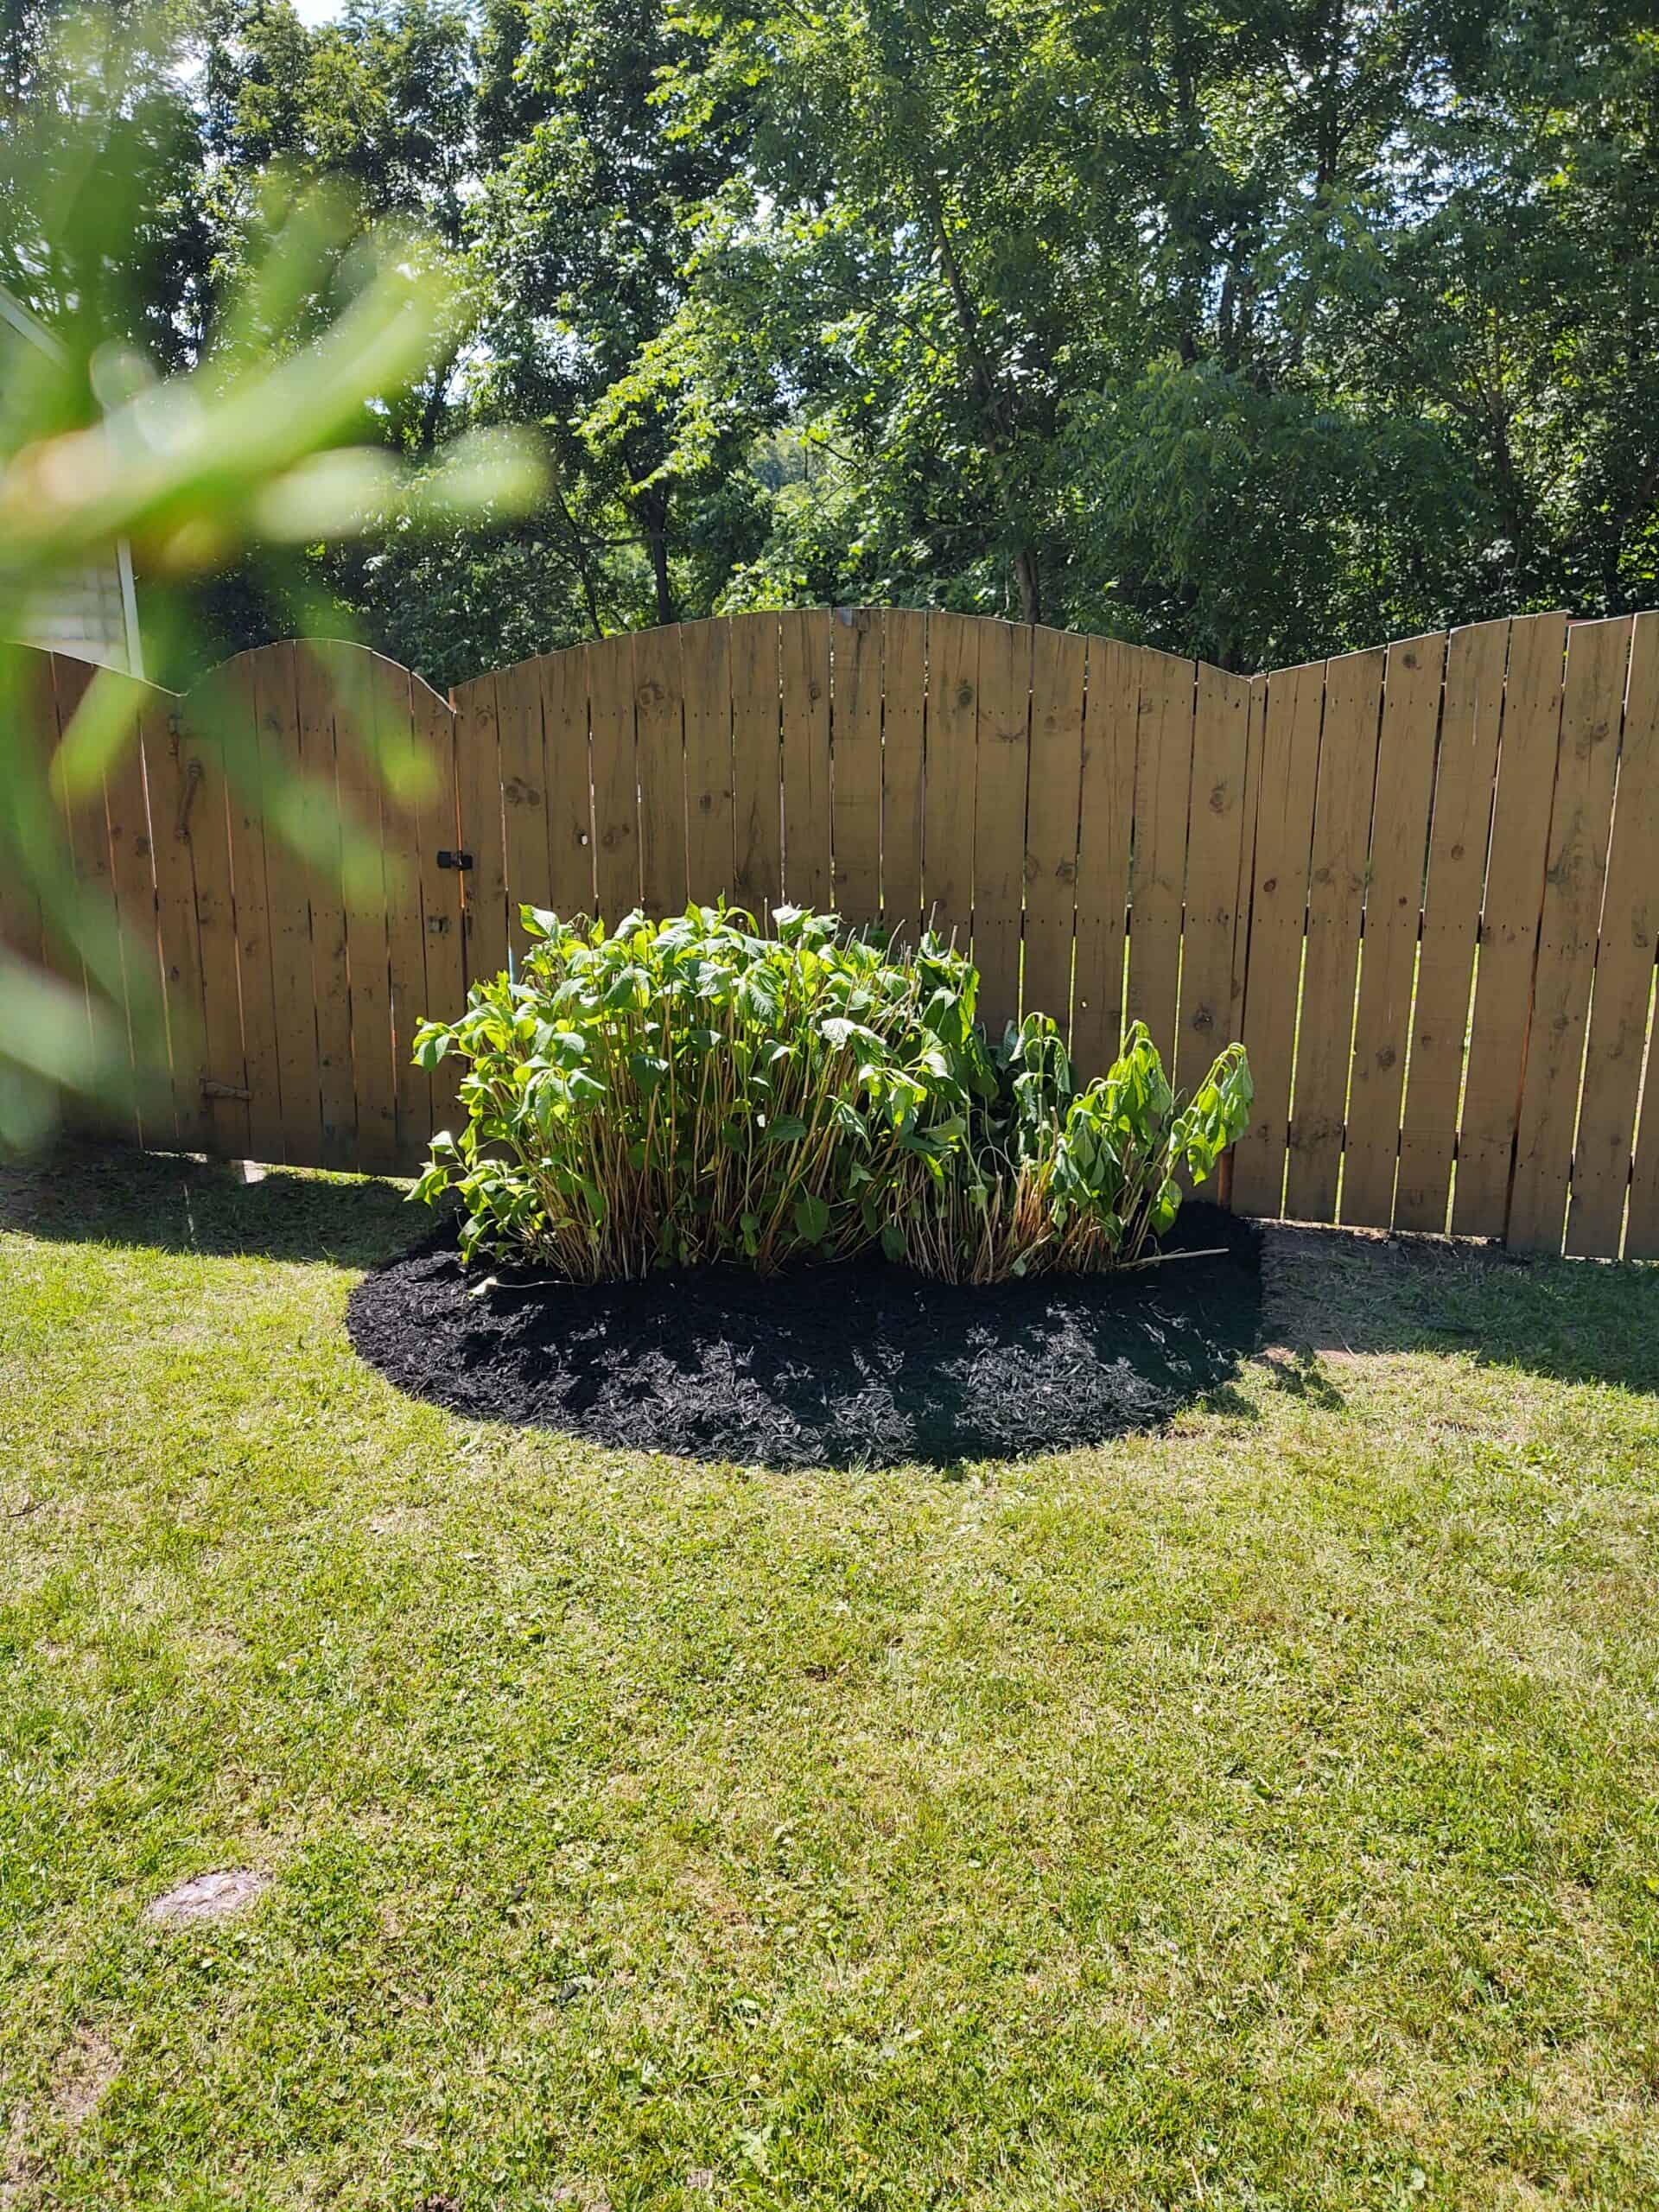 48989 scaled - Newman Landscaping & Sealcoating LLC